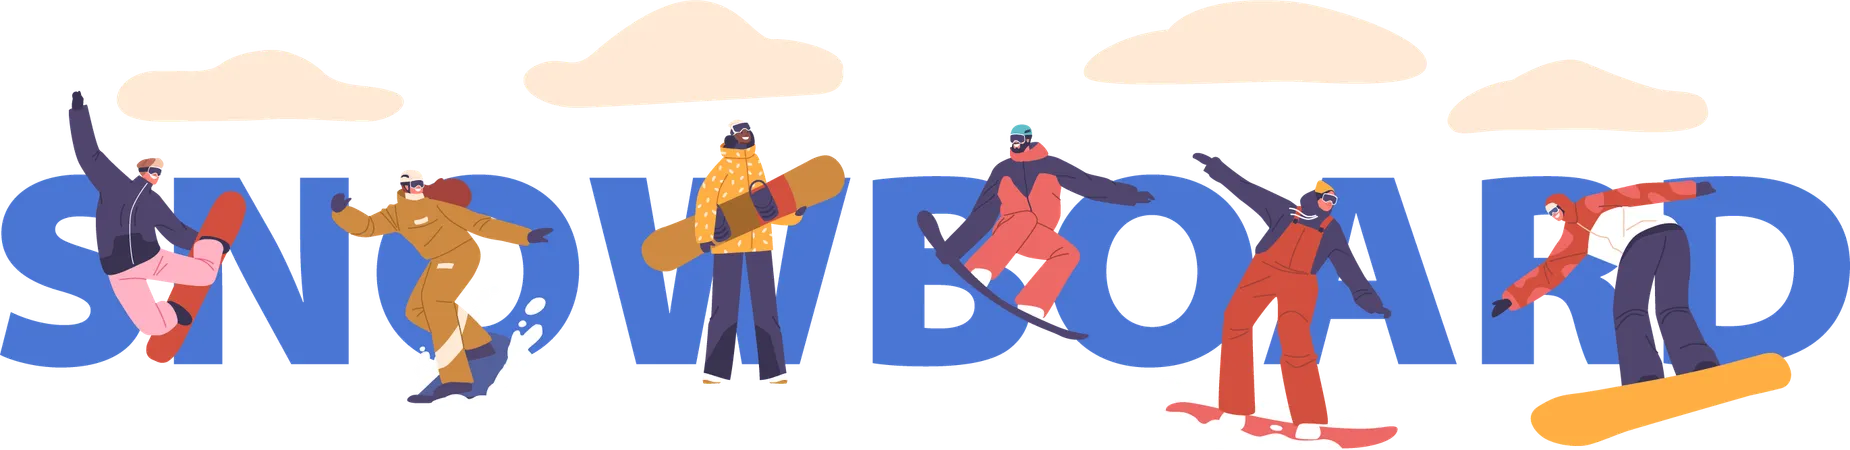 Characters On Snowboards Graceful Riders Carve Through Snow Effortlessly Navigate Slopes Merging Skill With Nature In A Dance Of Winter Exhilaration Vector Concept For Banner Poster Or Flyer Illustration